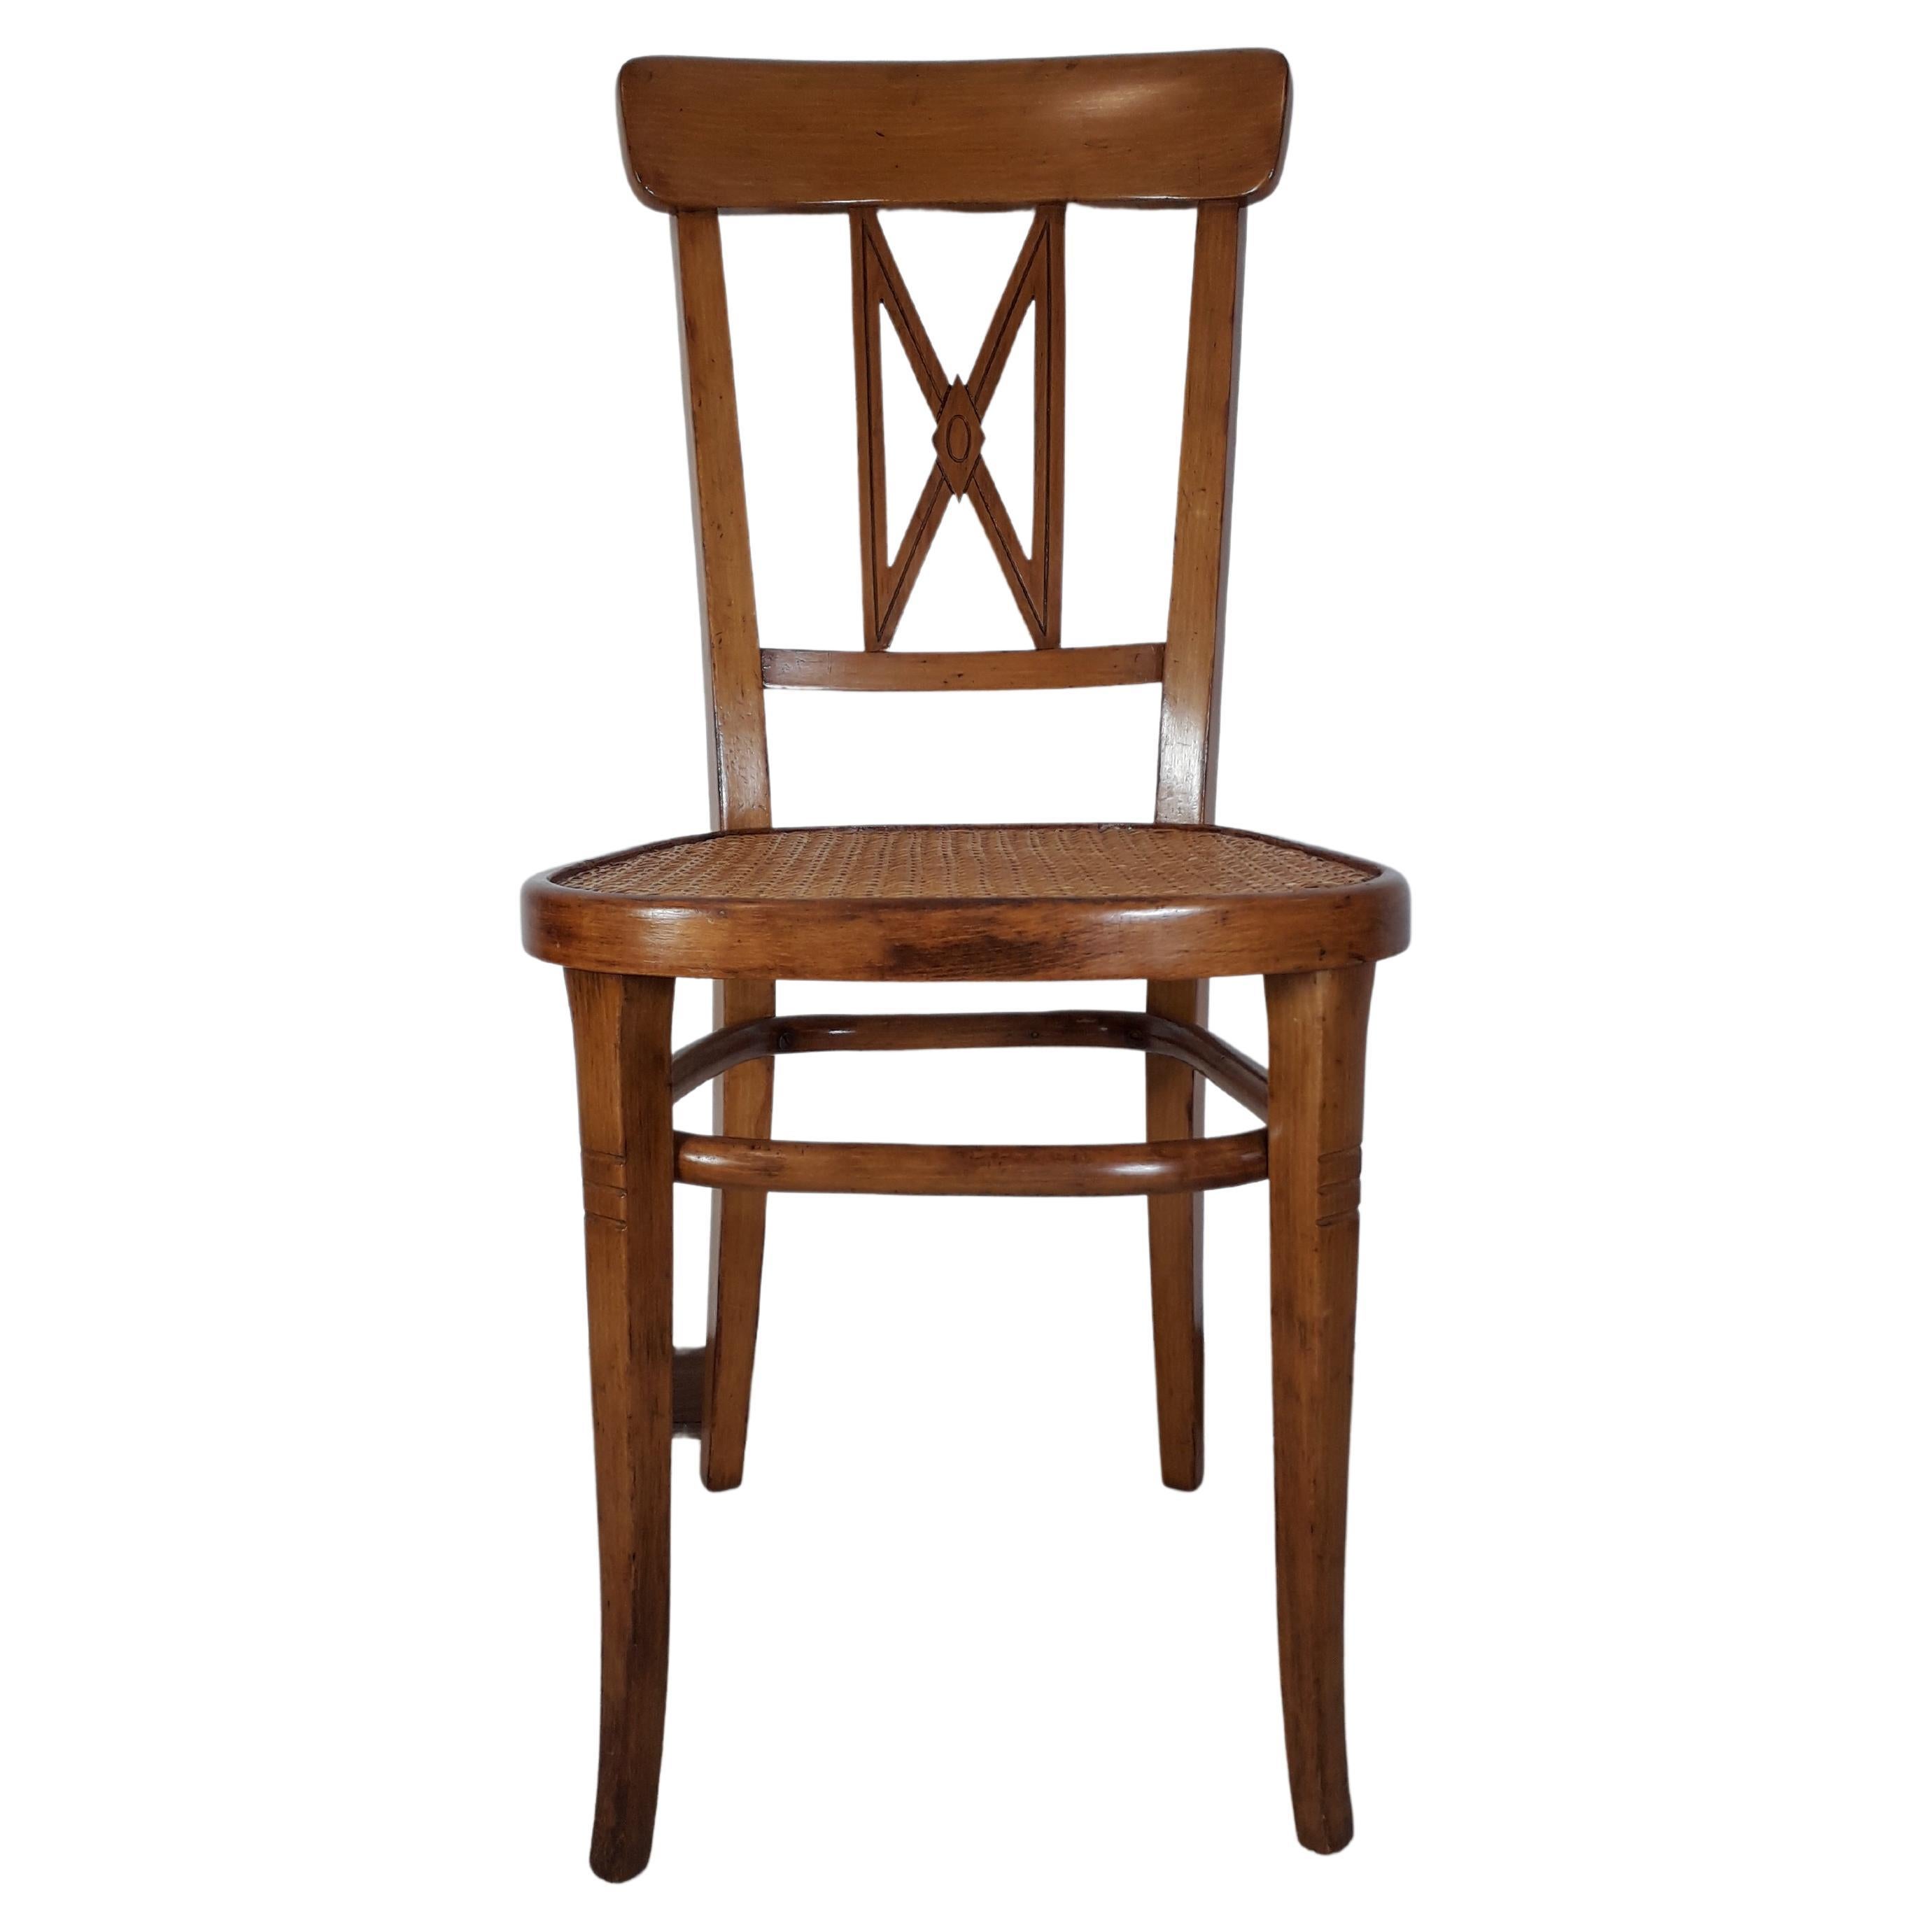 Rare chair of the Wiener Werkstaette considered the prototype of the successive variants on Design by the architect. Gustav Sigel. The rectangular sections and geometric motifs of the backrest are characteristic.
This model is in blond beech and